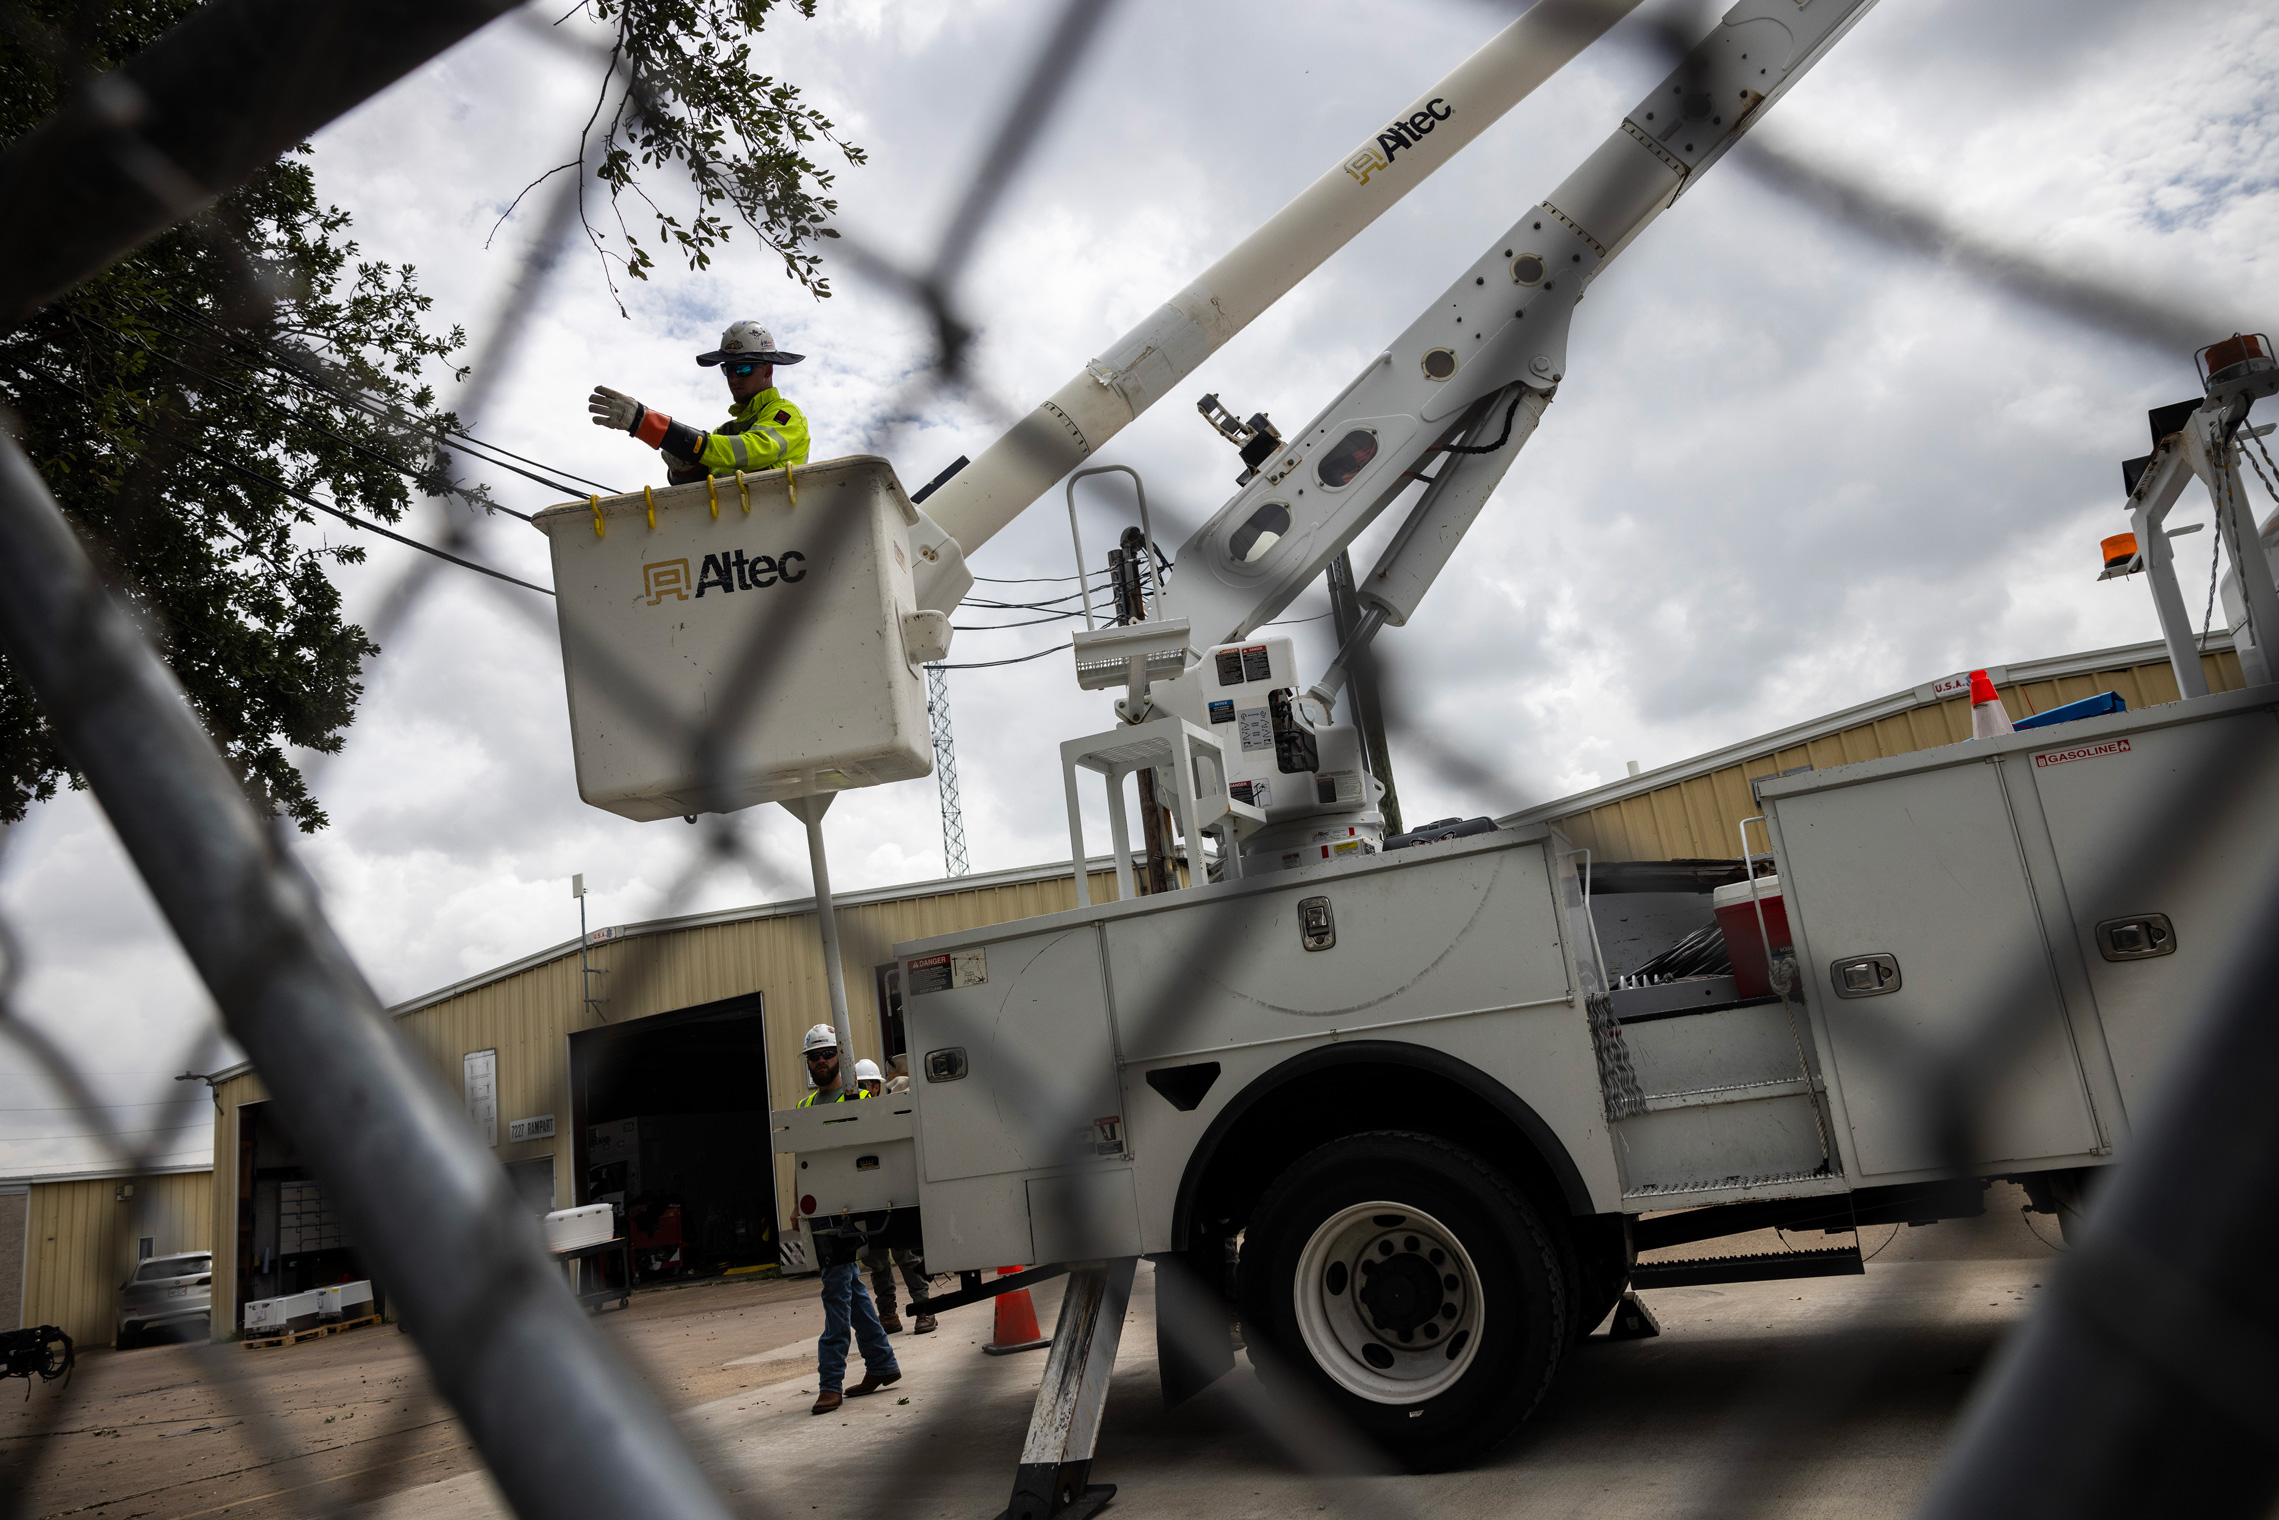 Will CenterPoint’s new plan prevent power outages? 3 takeaways from the Landing’s review